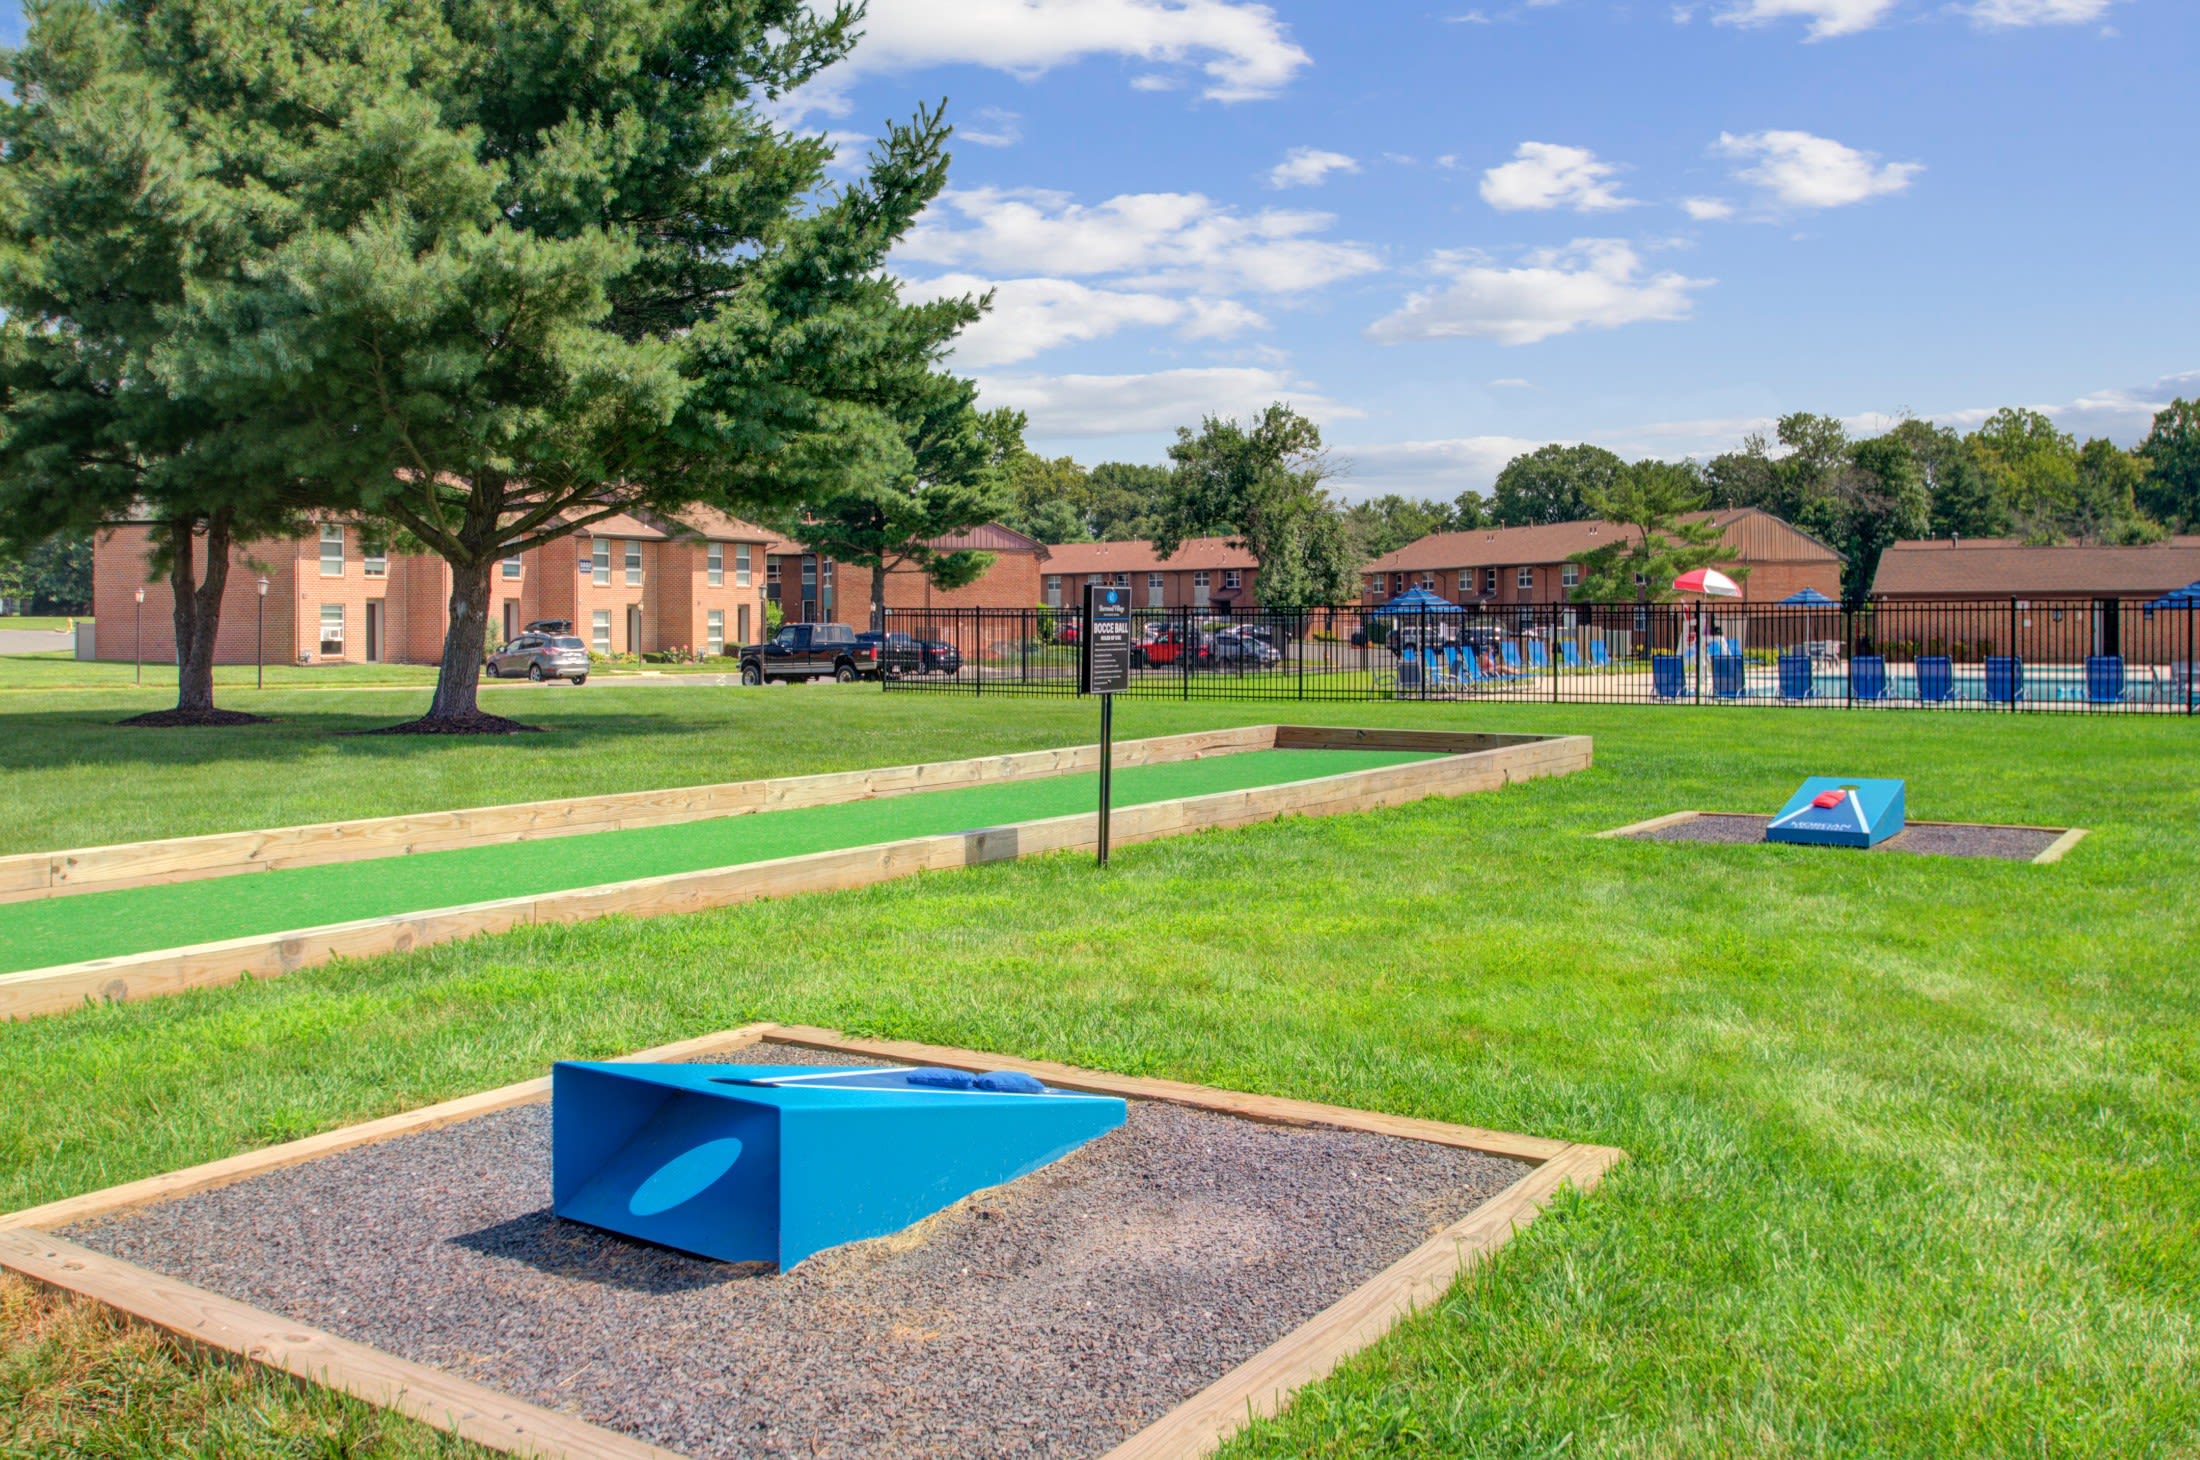 Corn hole and bocce ball on the lawn at Sherwood Village Apartment & Townhomes in Eastampton, New Jersey